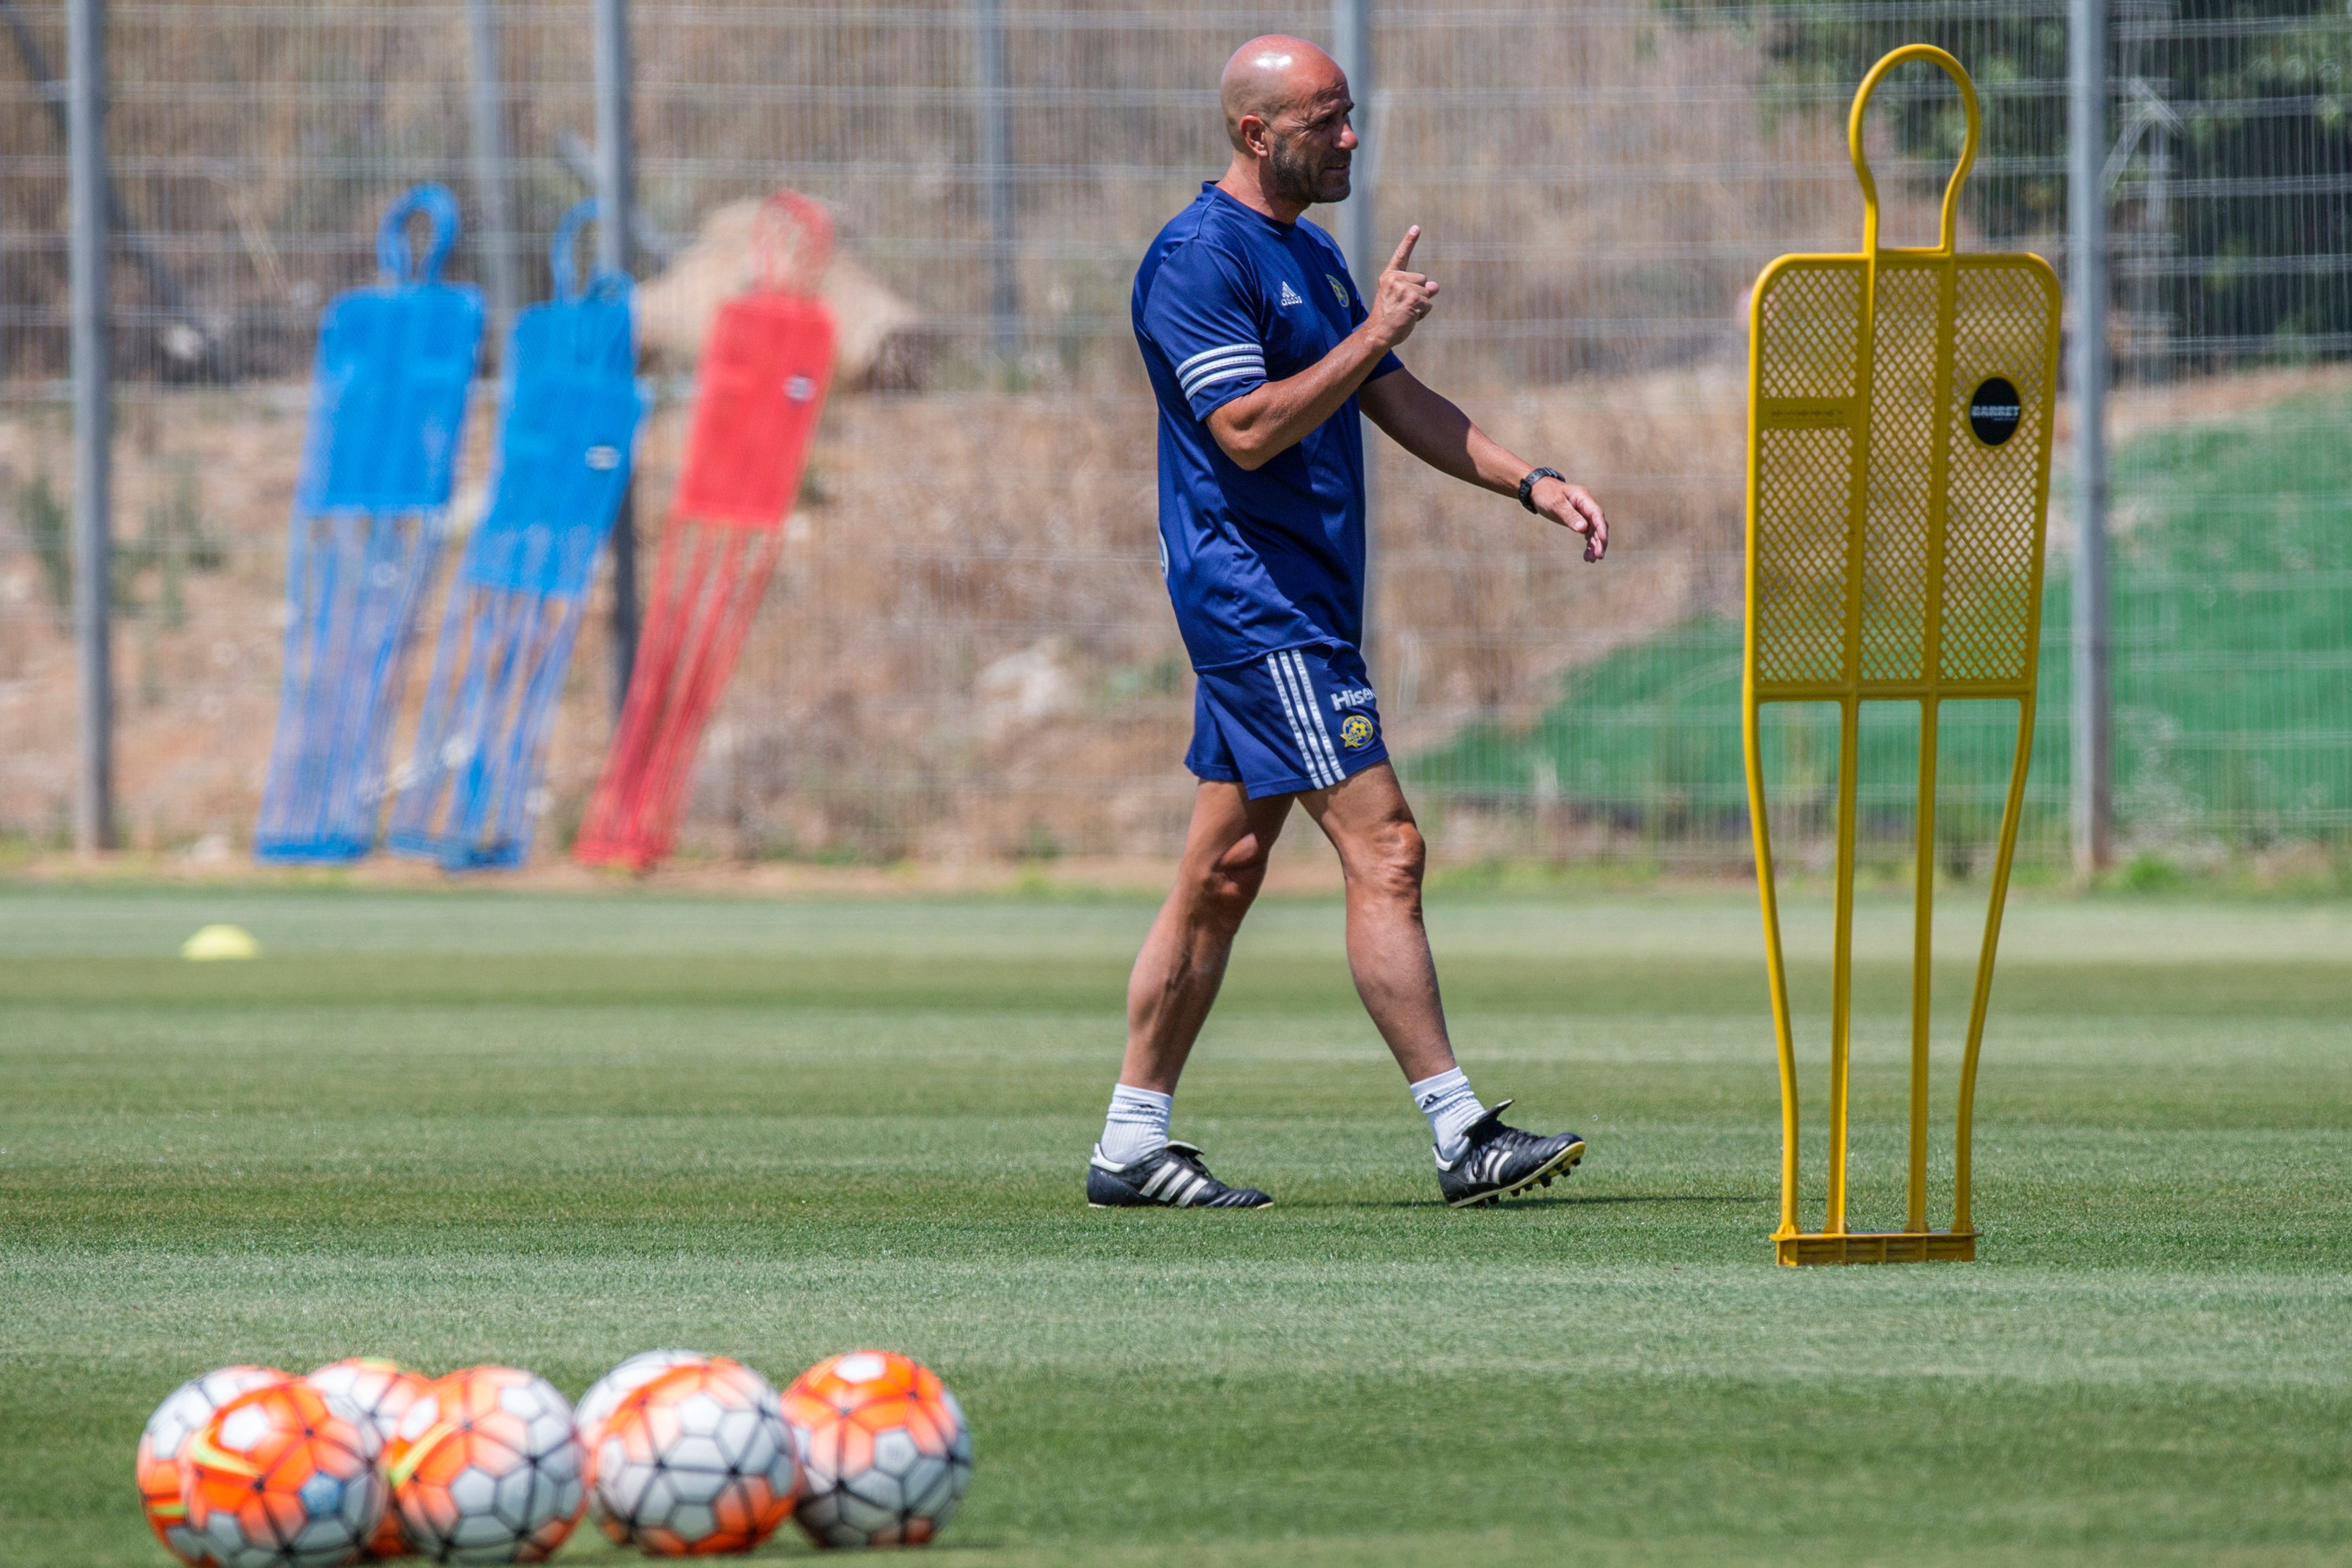 Peter Bosz leads a training session during his short stint with Maccabi Tel Aviv. / AFP / JACK GUEZ